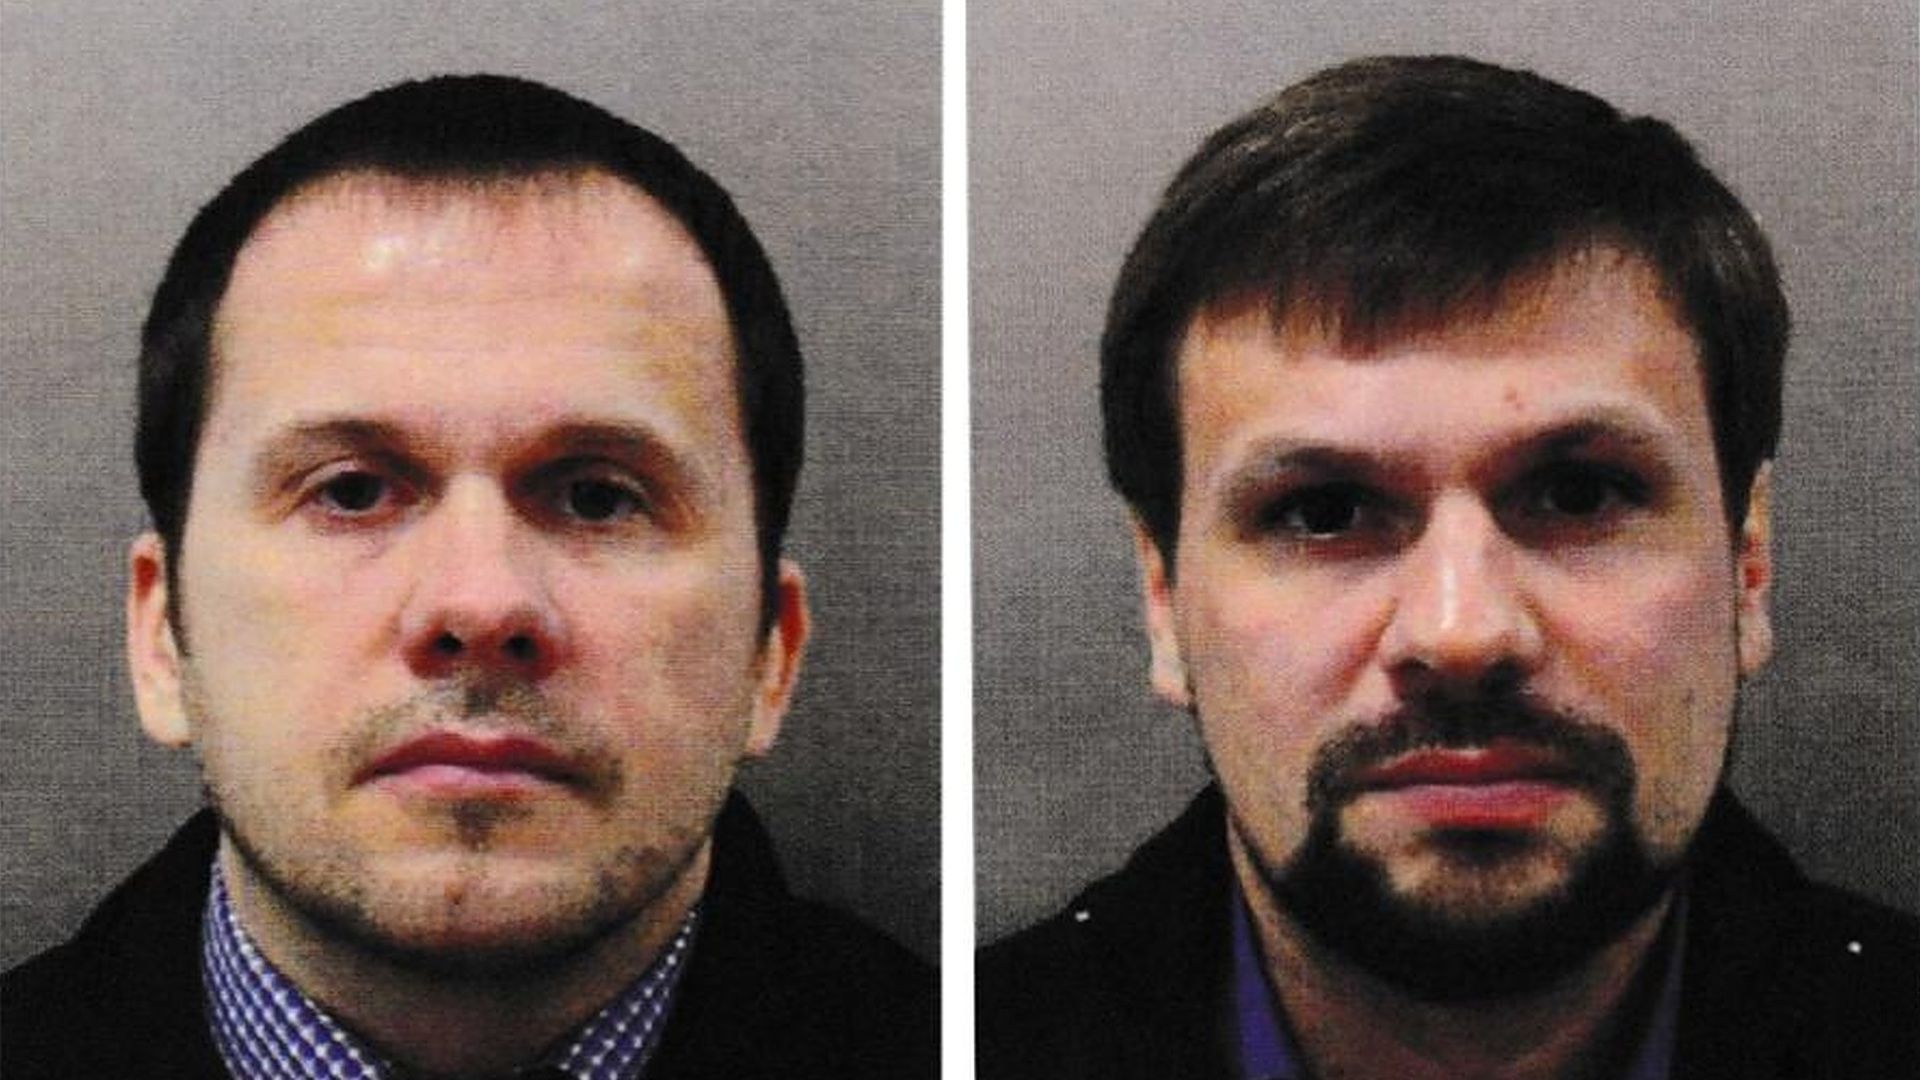 Alexander Petrov and Ruslan Boshirov, who have been charged over the Salisbury Novichok attack, released on September 05, 2018 in London, England. 